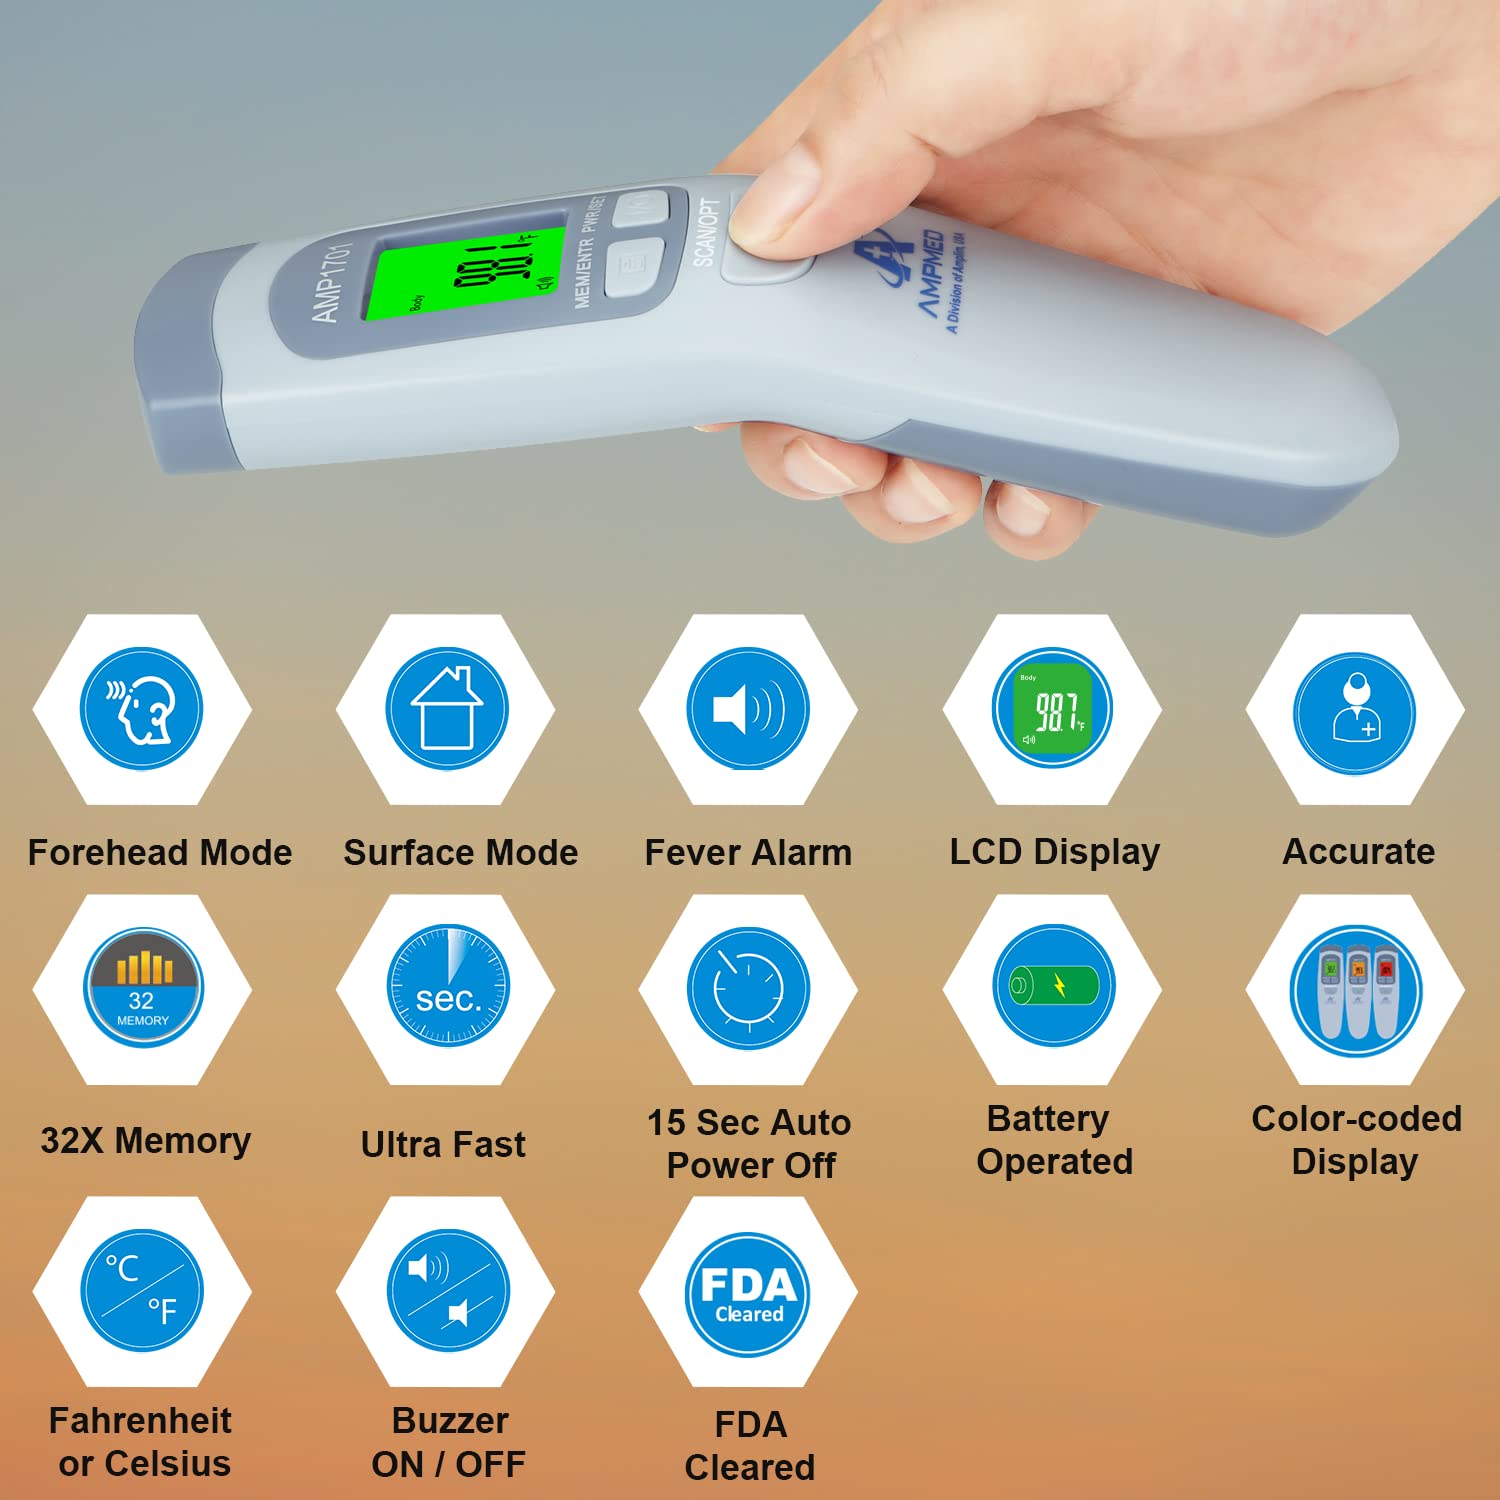 Amplim Bundle of Hospital Medical Grade No Touch Non Contact Digital Infrared Temporal Forehead Thermometer for Adult/Baby/Kid/Toddler/Infant/Nurse